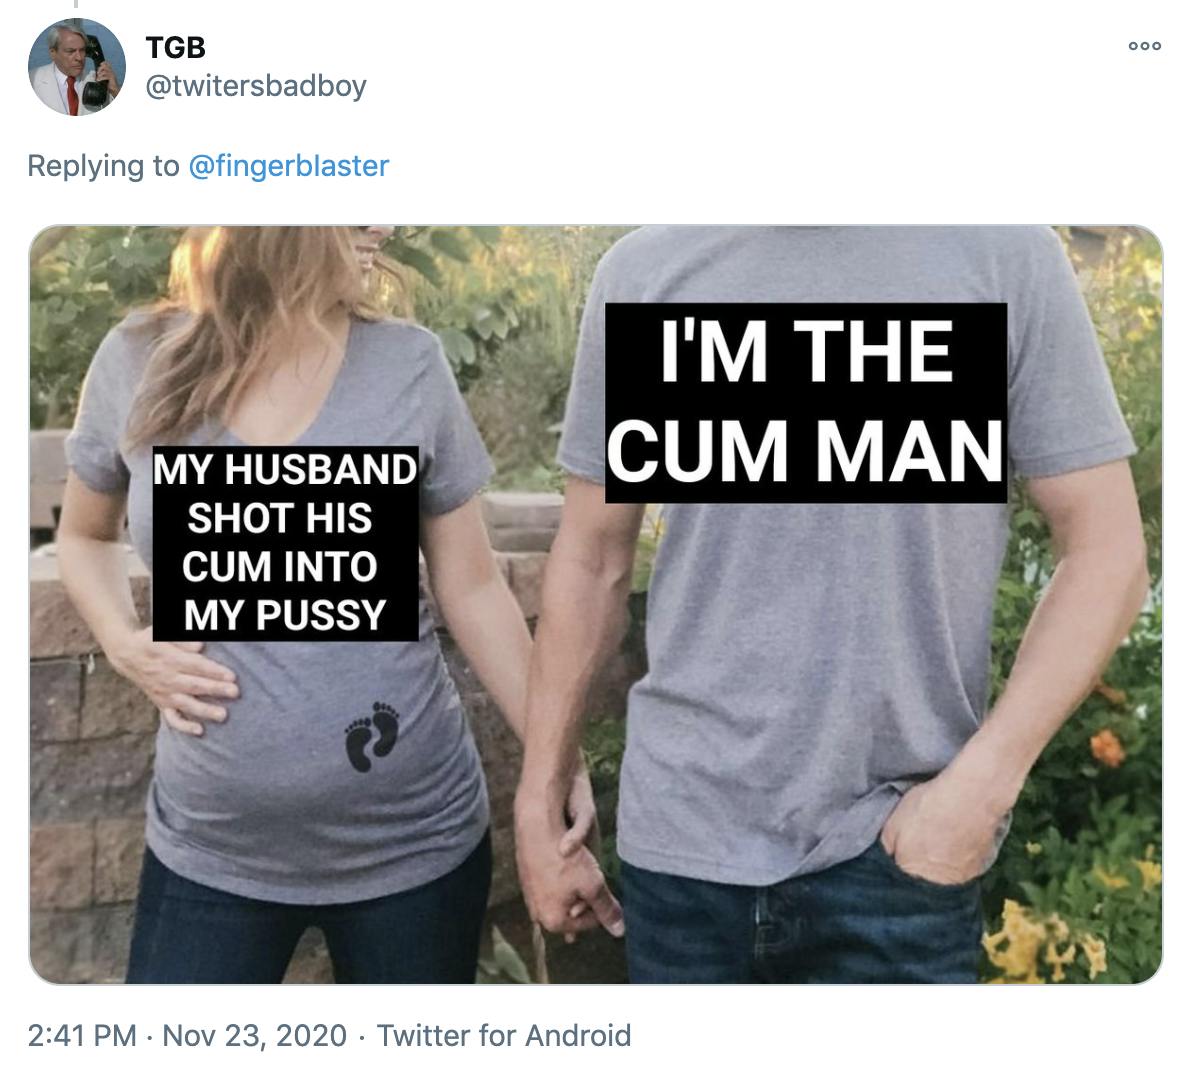 original image with the text on the shirts replaced by 'my husband shot his cum into my pussy' and 'I'm the cum man'